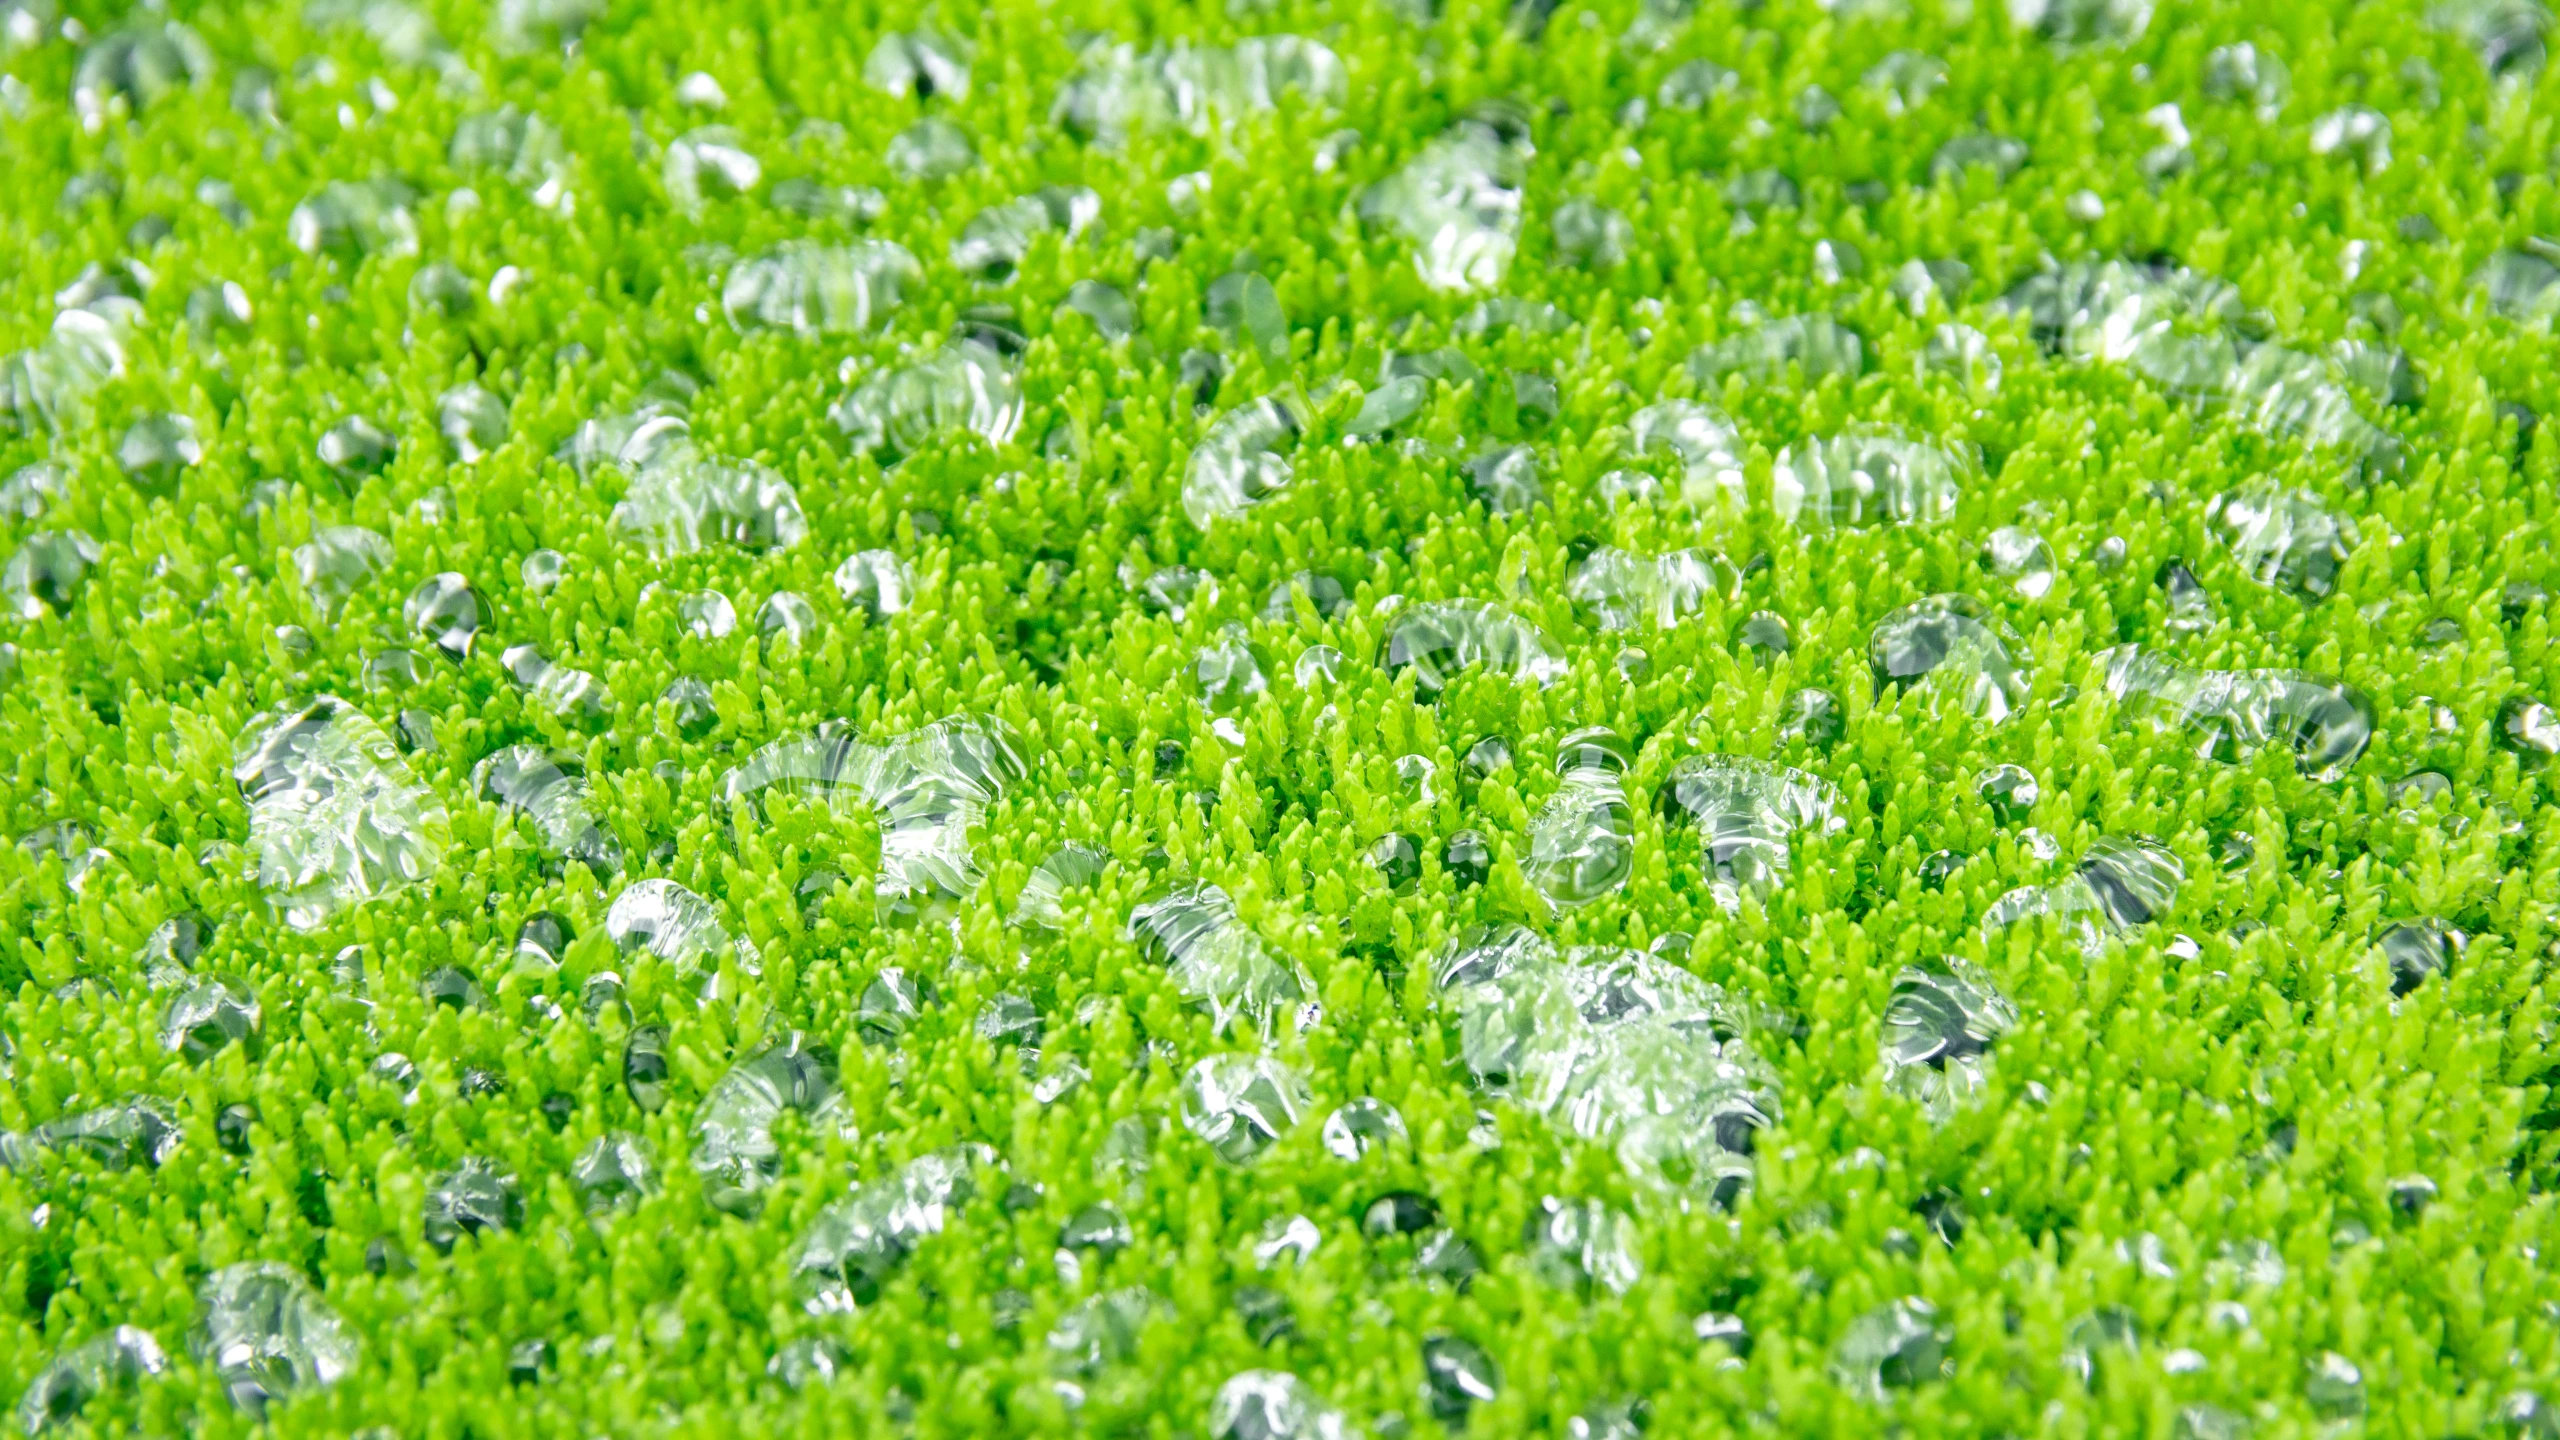 green plants with some white flowers in the grass